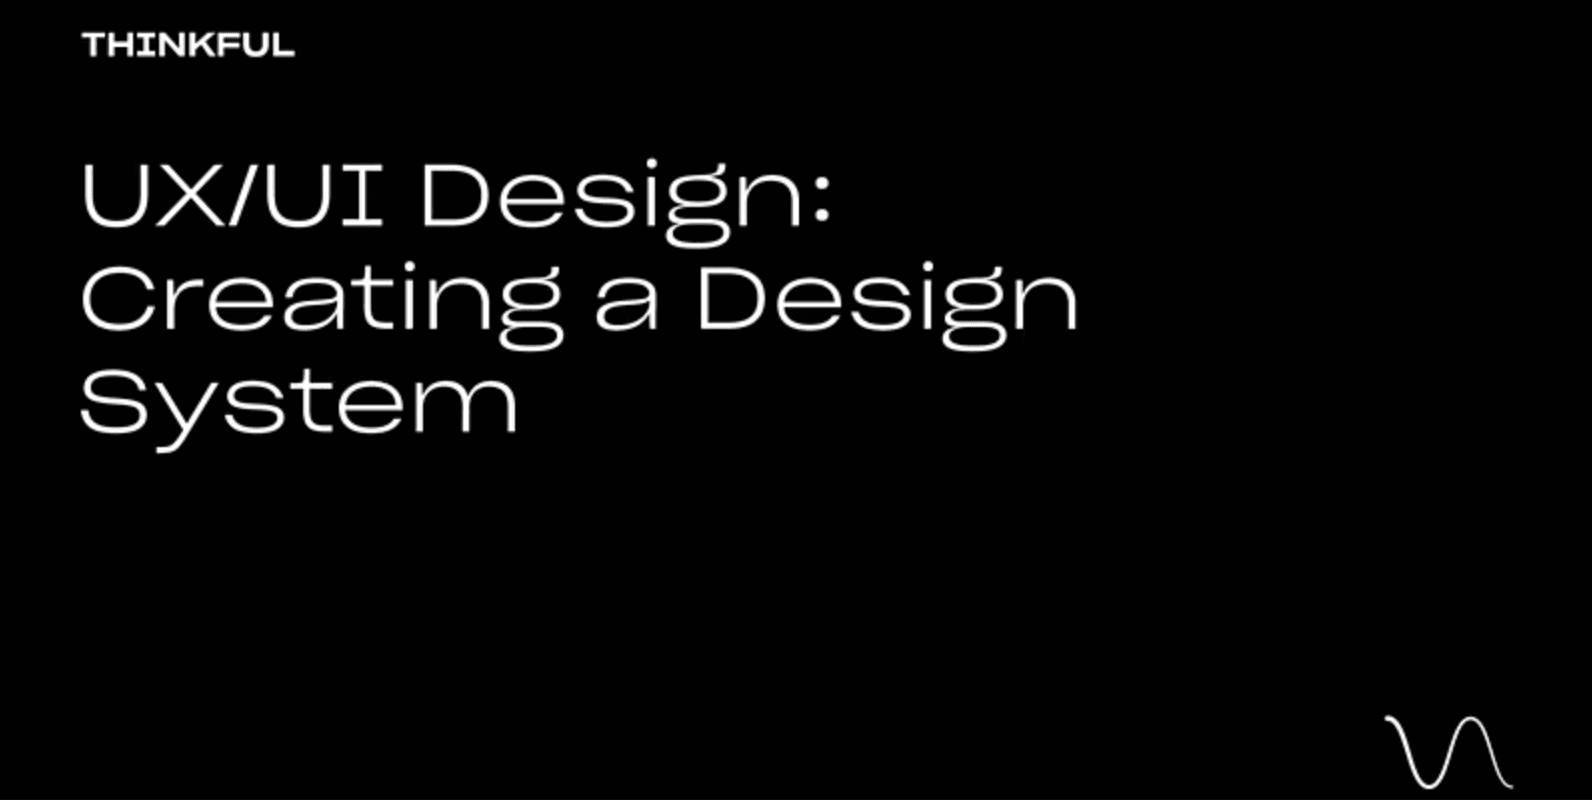 UI/UX Design: Creating a Design System by Thinkful